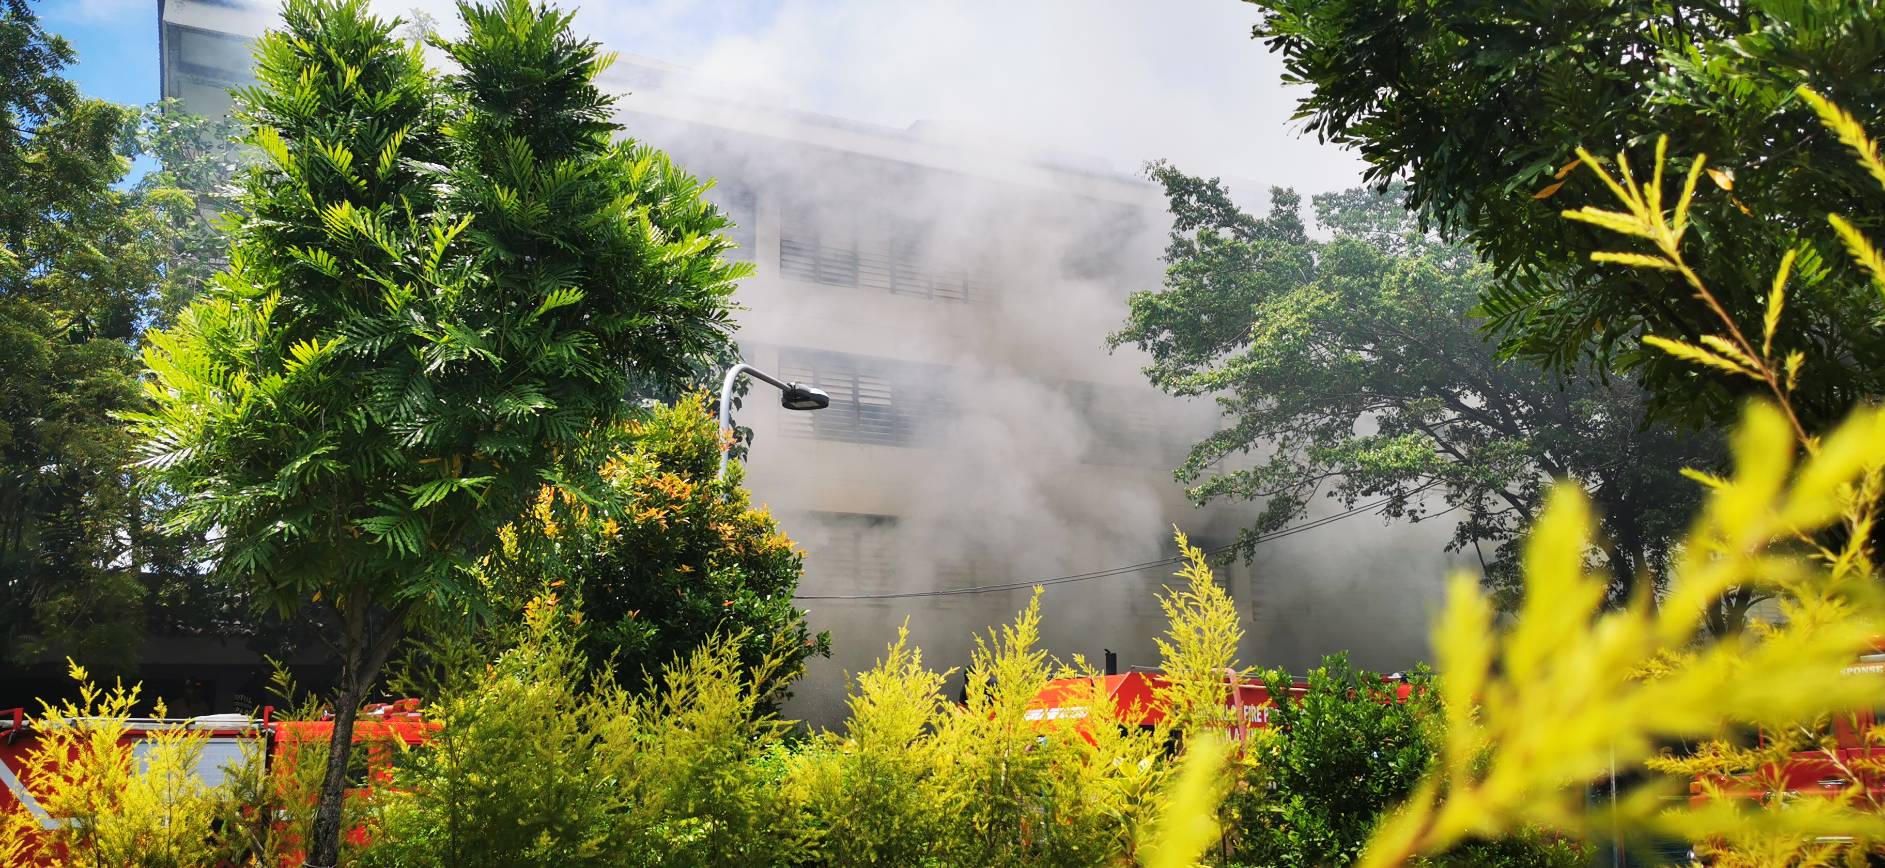 Building in flames with thick smoke coming out of the windows. 【Photo by Johnny Kwok】